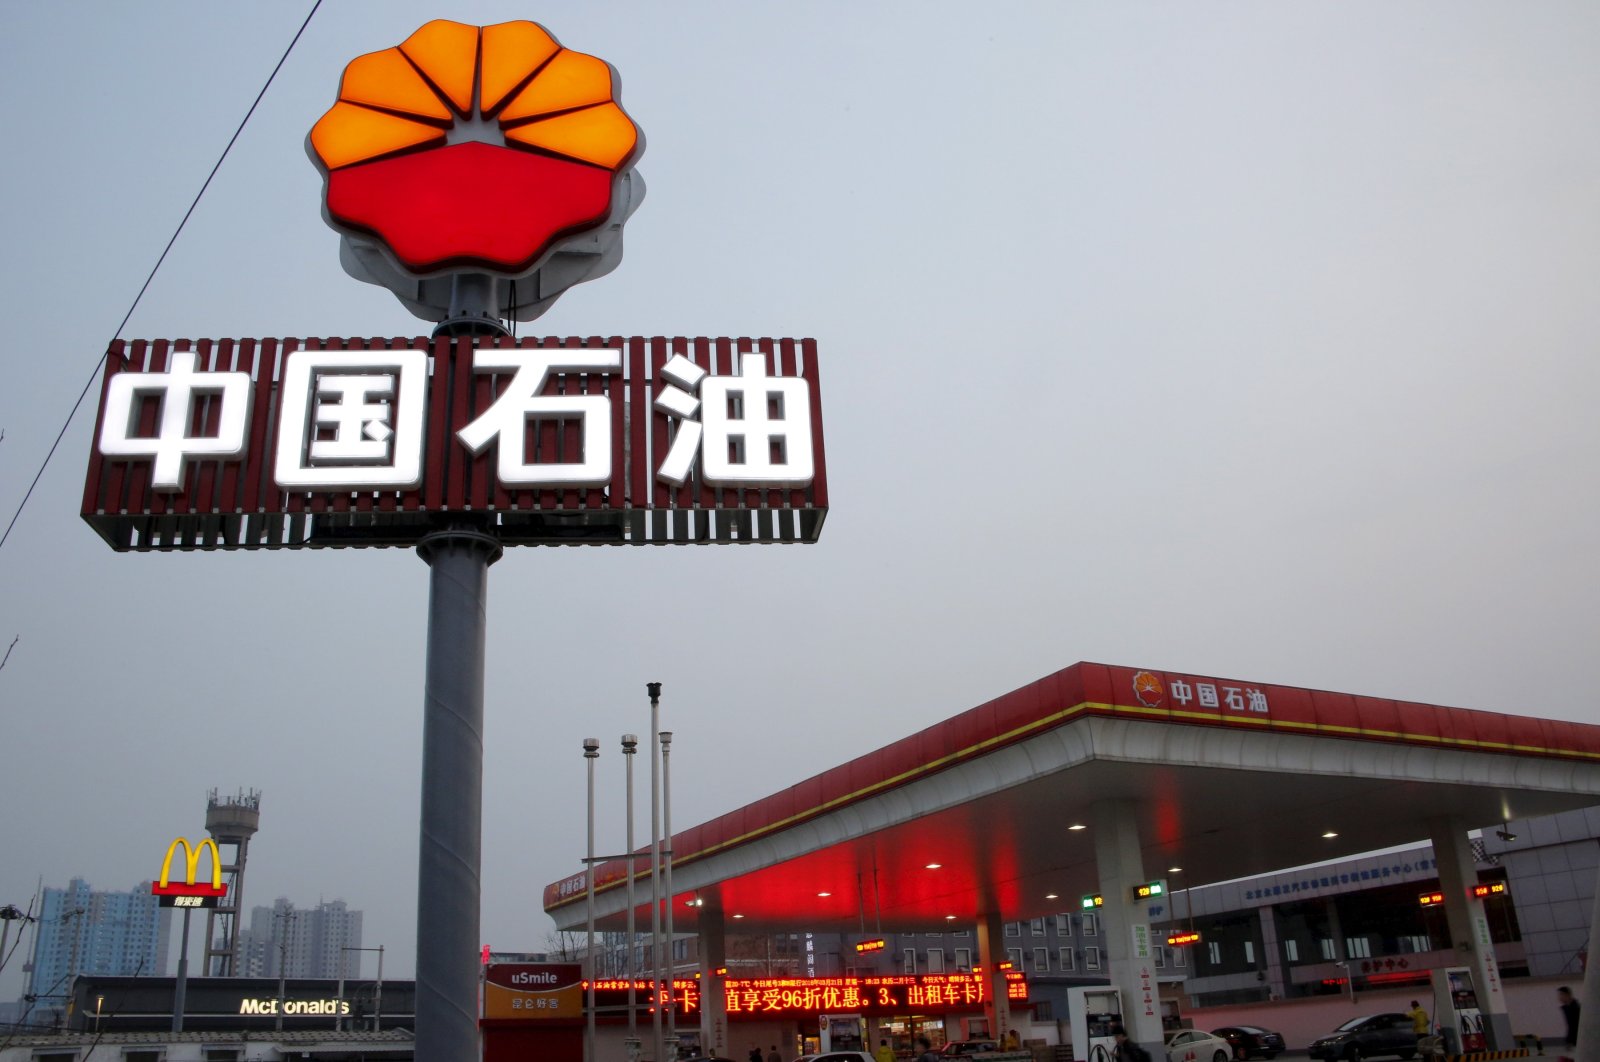 A PetroChina petrol station is pictured in Beijing, China, March 21, 2016. (Reuters Photo)